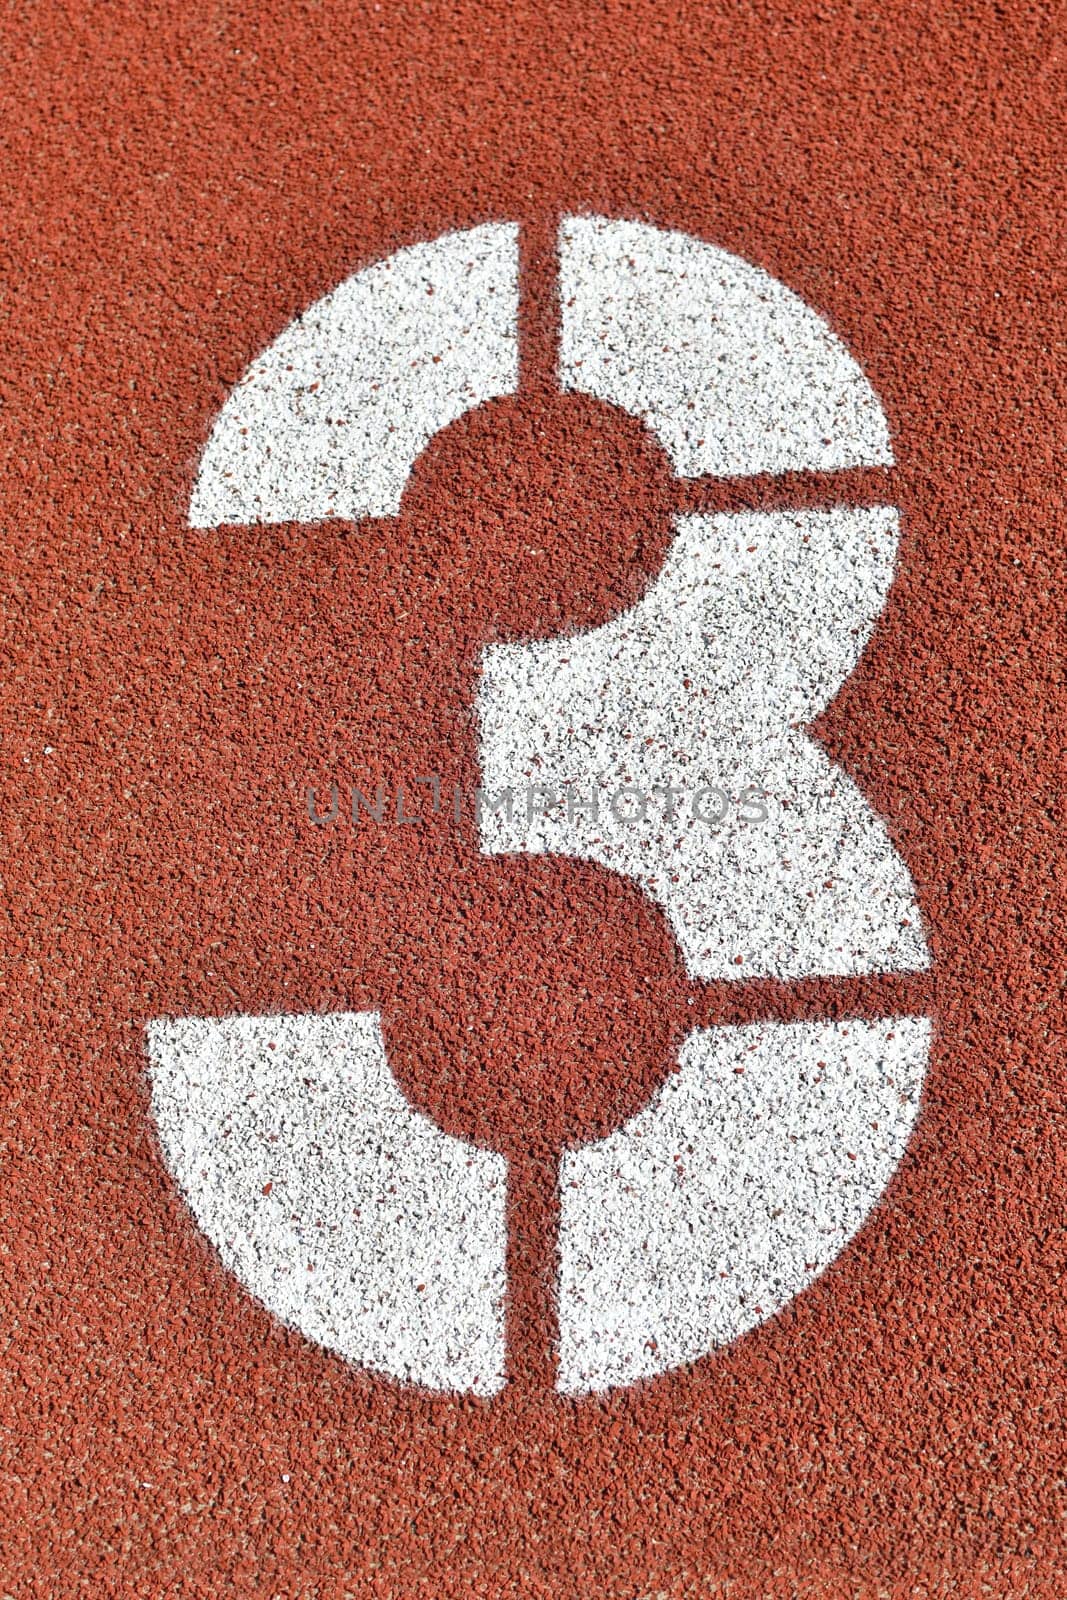 Number three on the red runway is numbered in a stadium